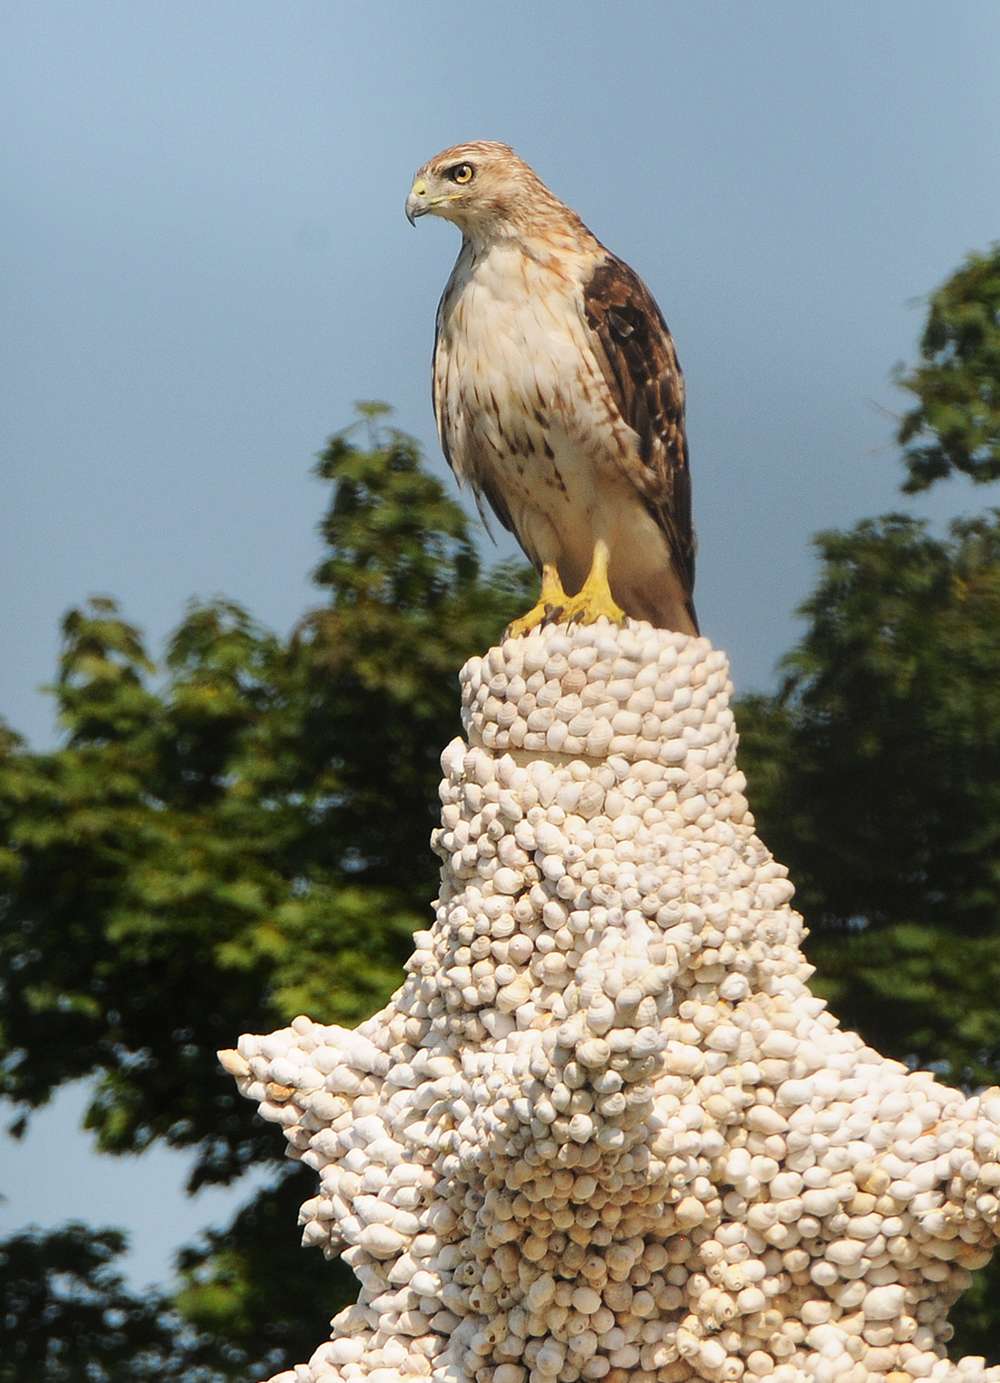 Red-tailed Hawk perched on sculpture in summer 2017.